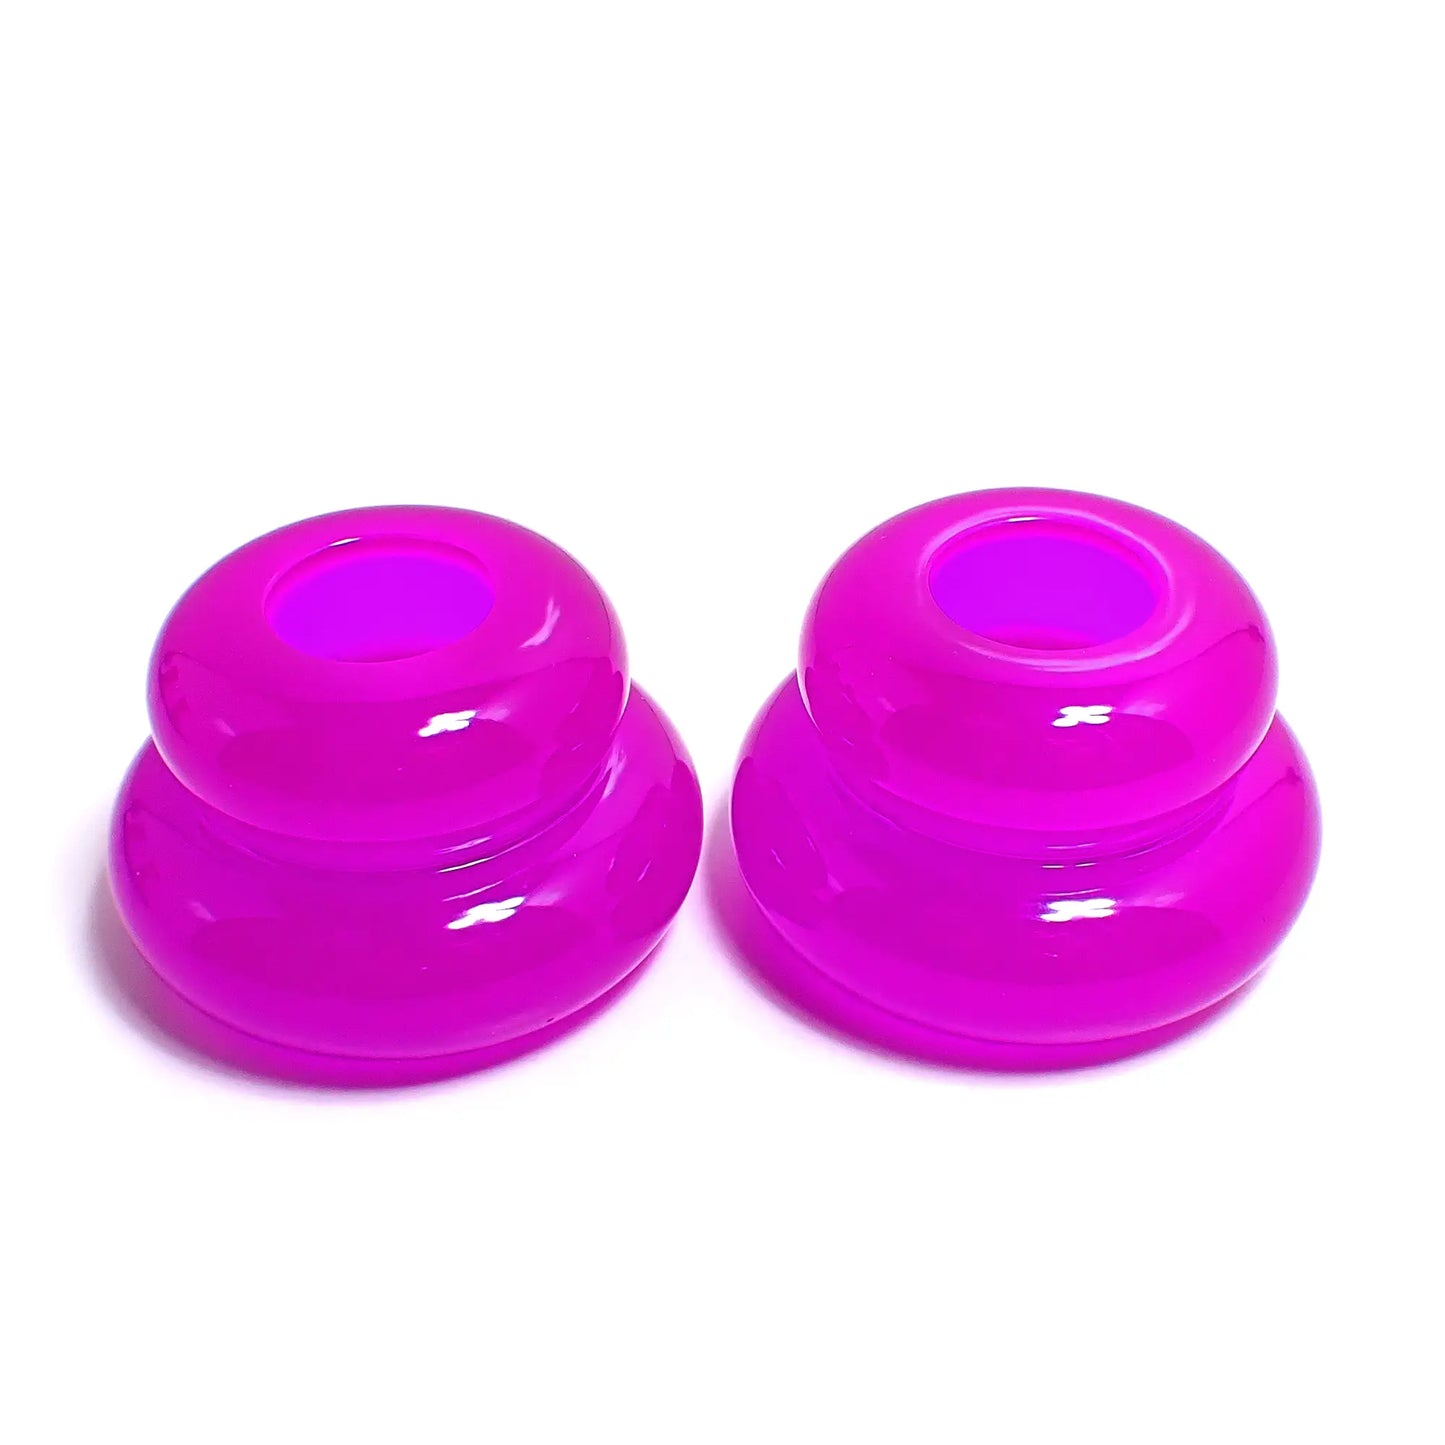 Set of Two Neon Purple Resin Handmade Puffy Round Double Ring Candlestick Holders